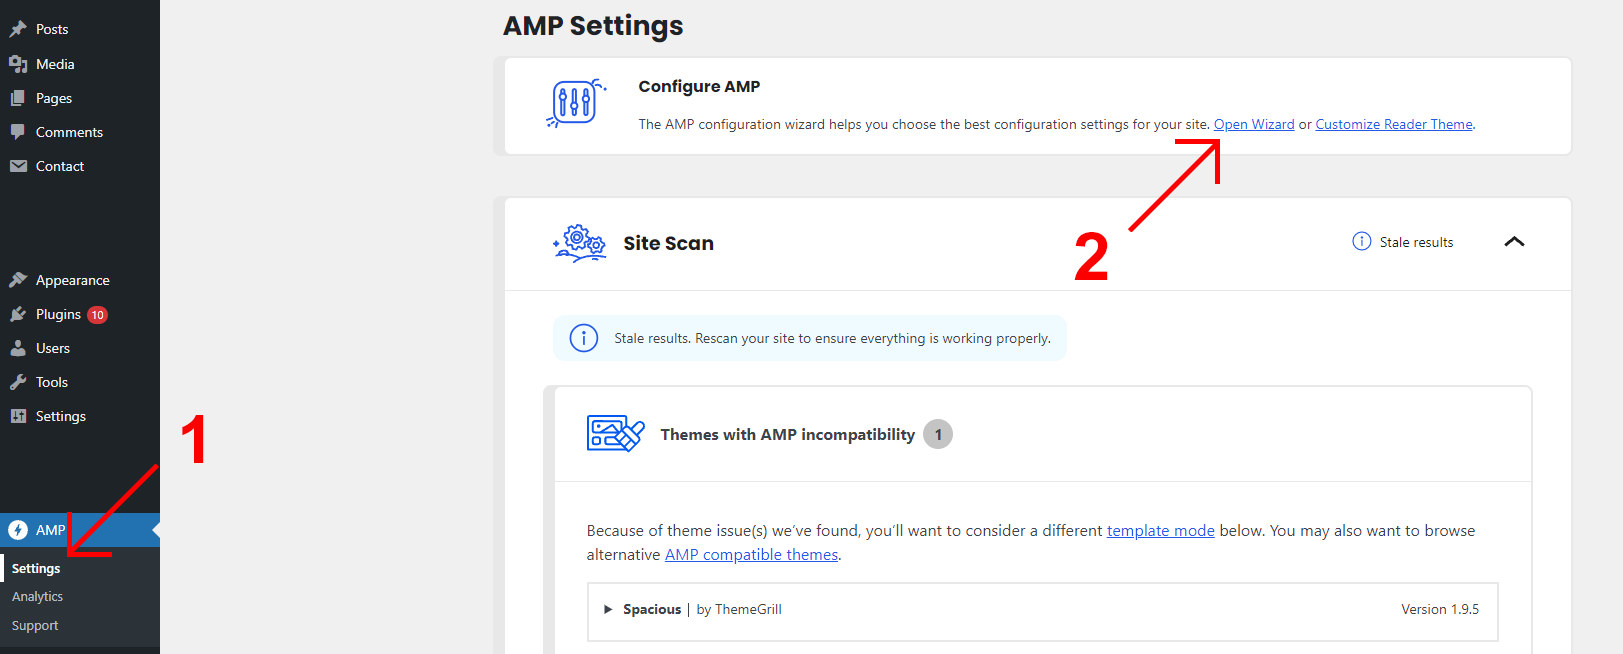 After that go to AMP → Settings and click on the Open Wizard button.